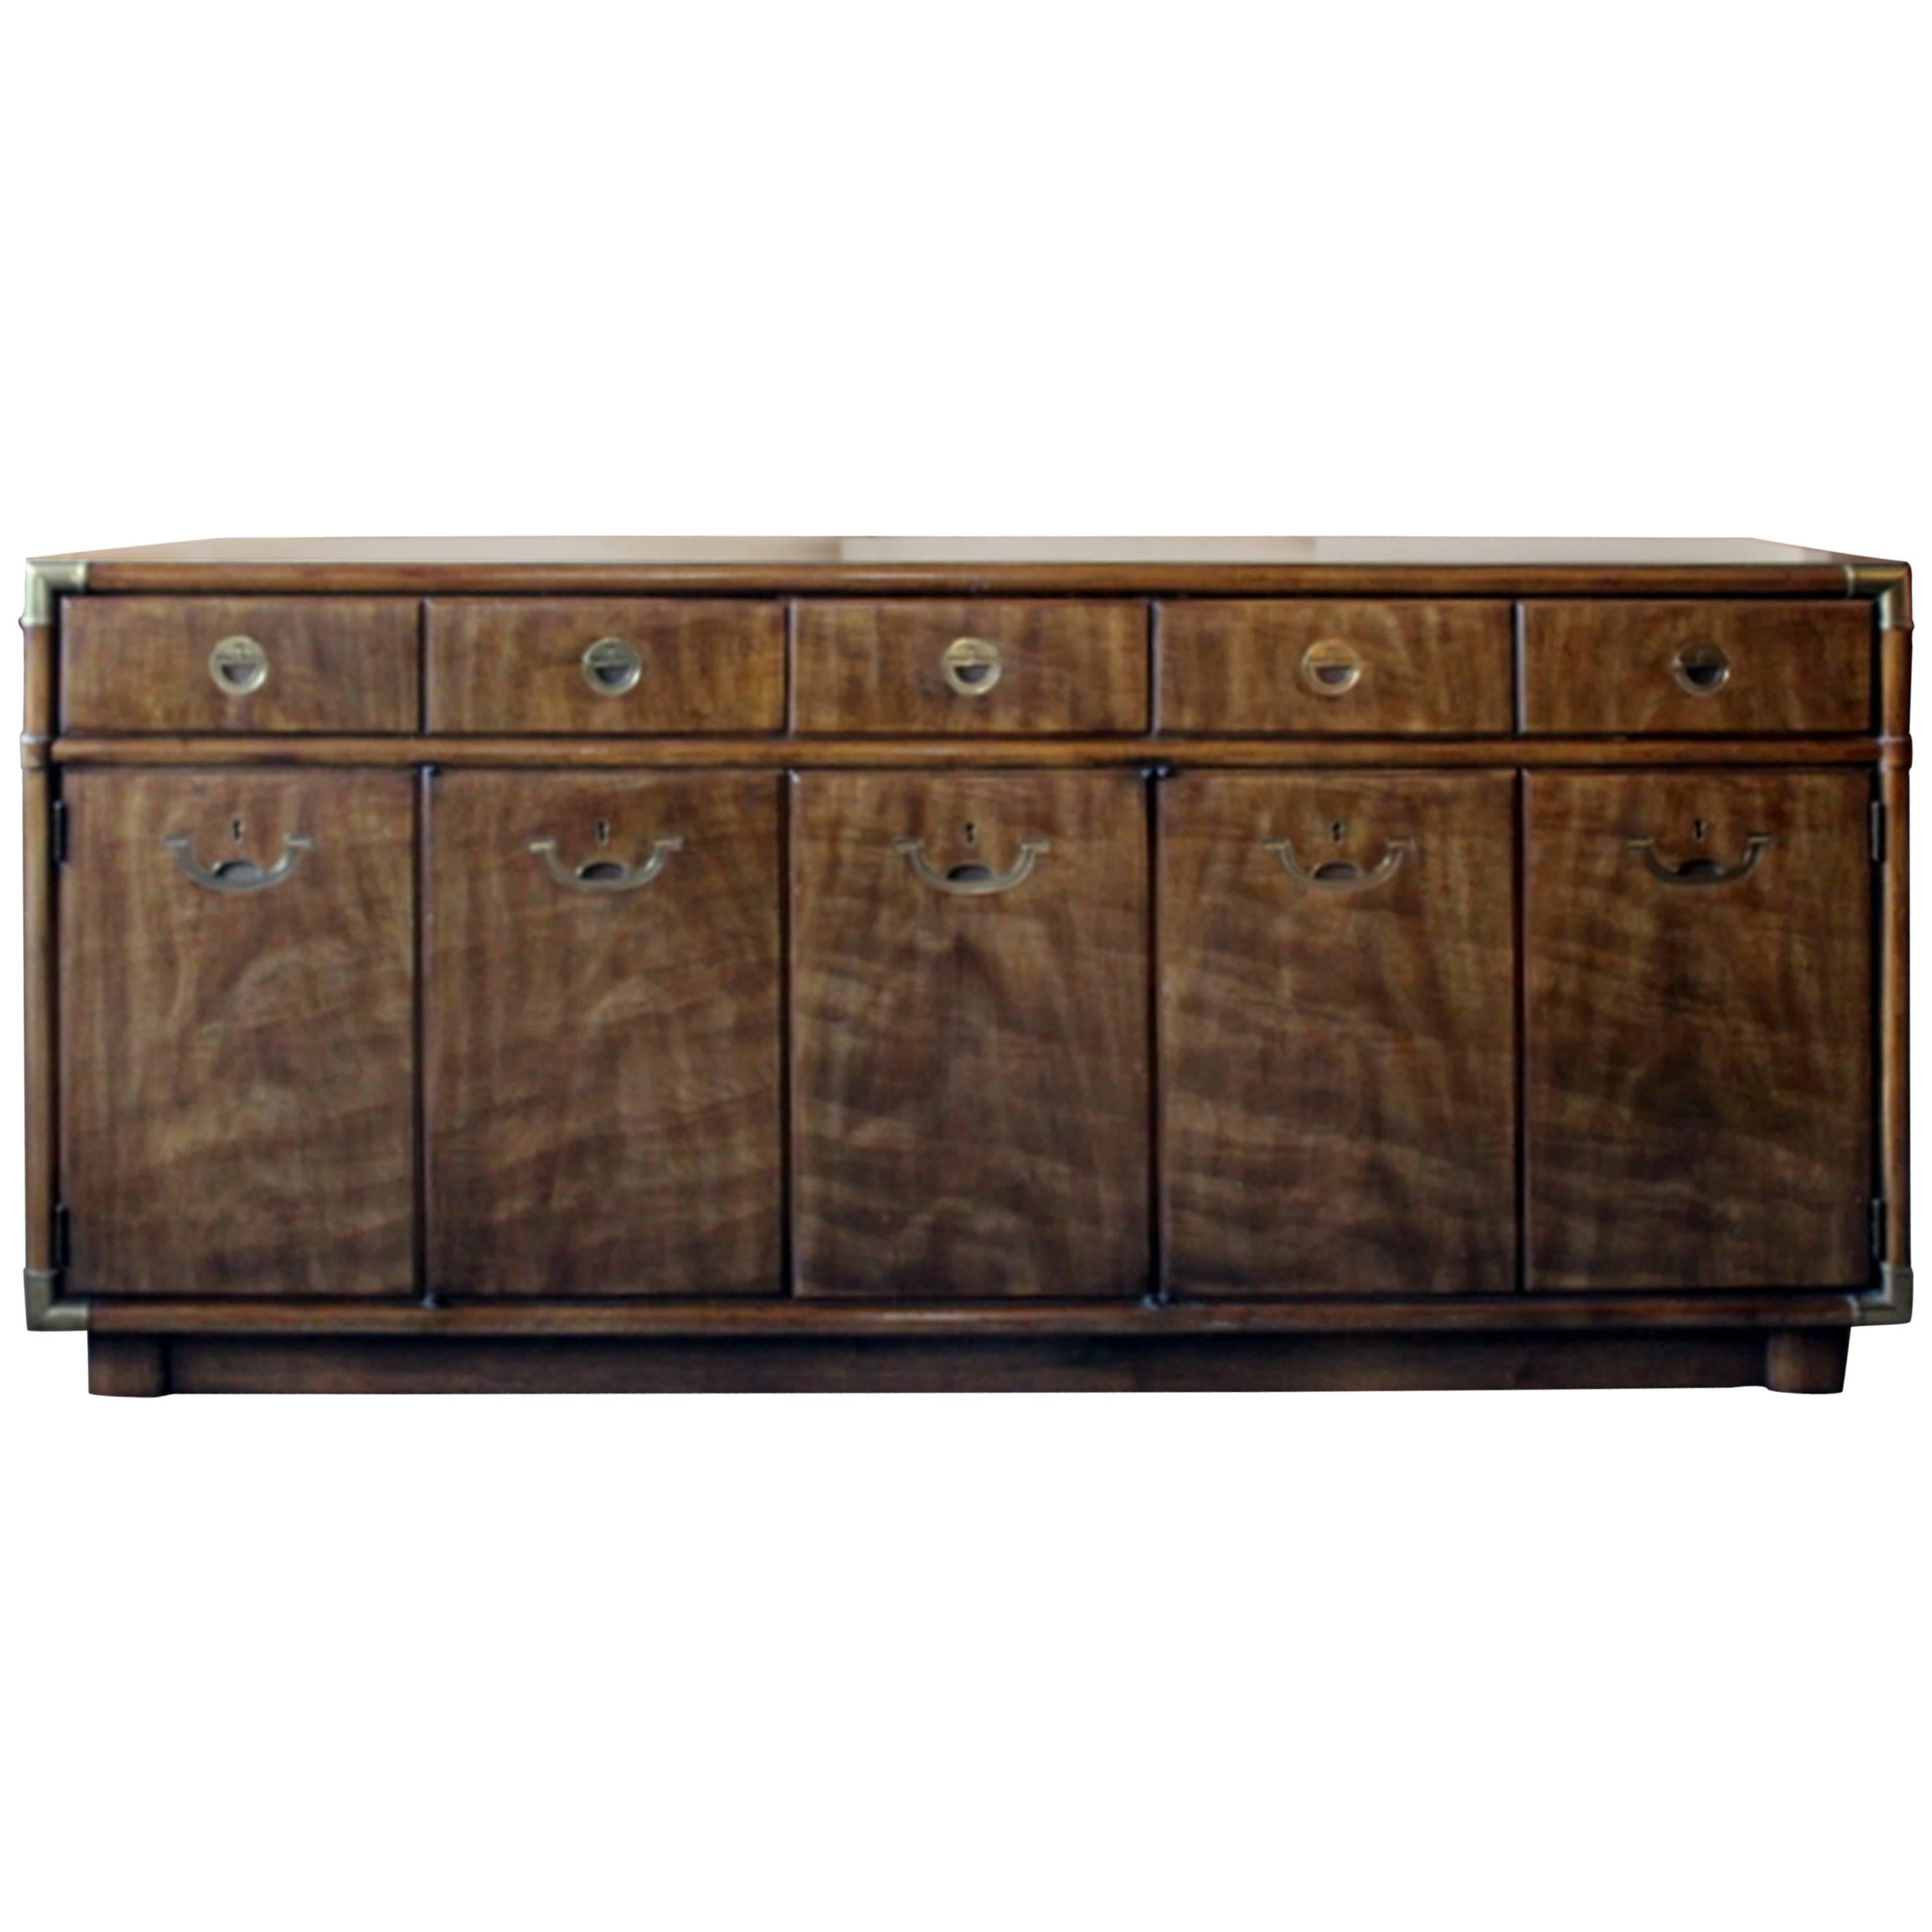 Drexel Heritage Campaign Buffet or Sideboard on Rollers